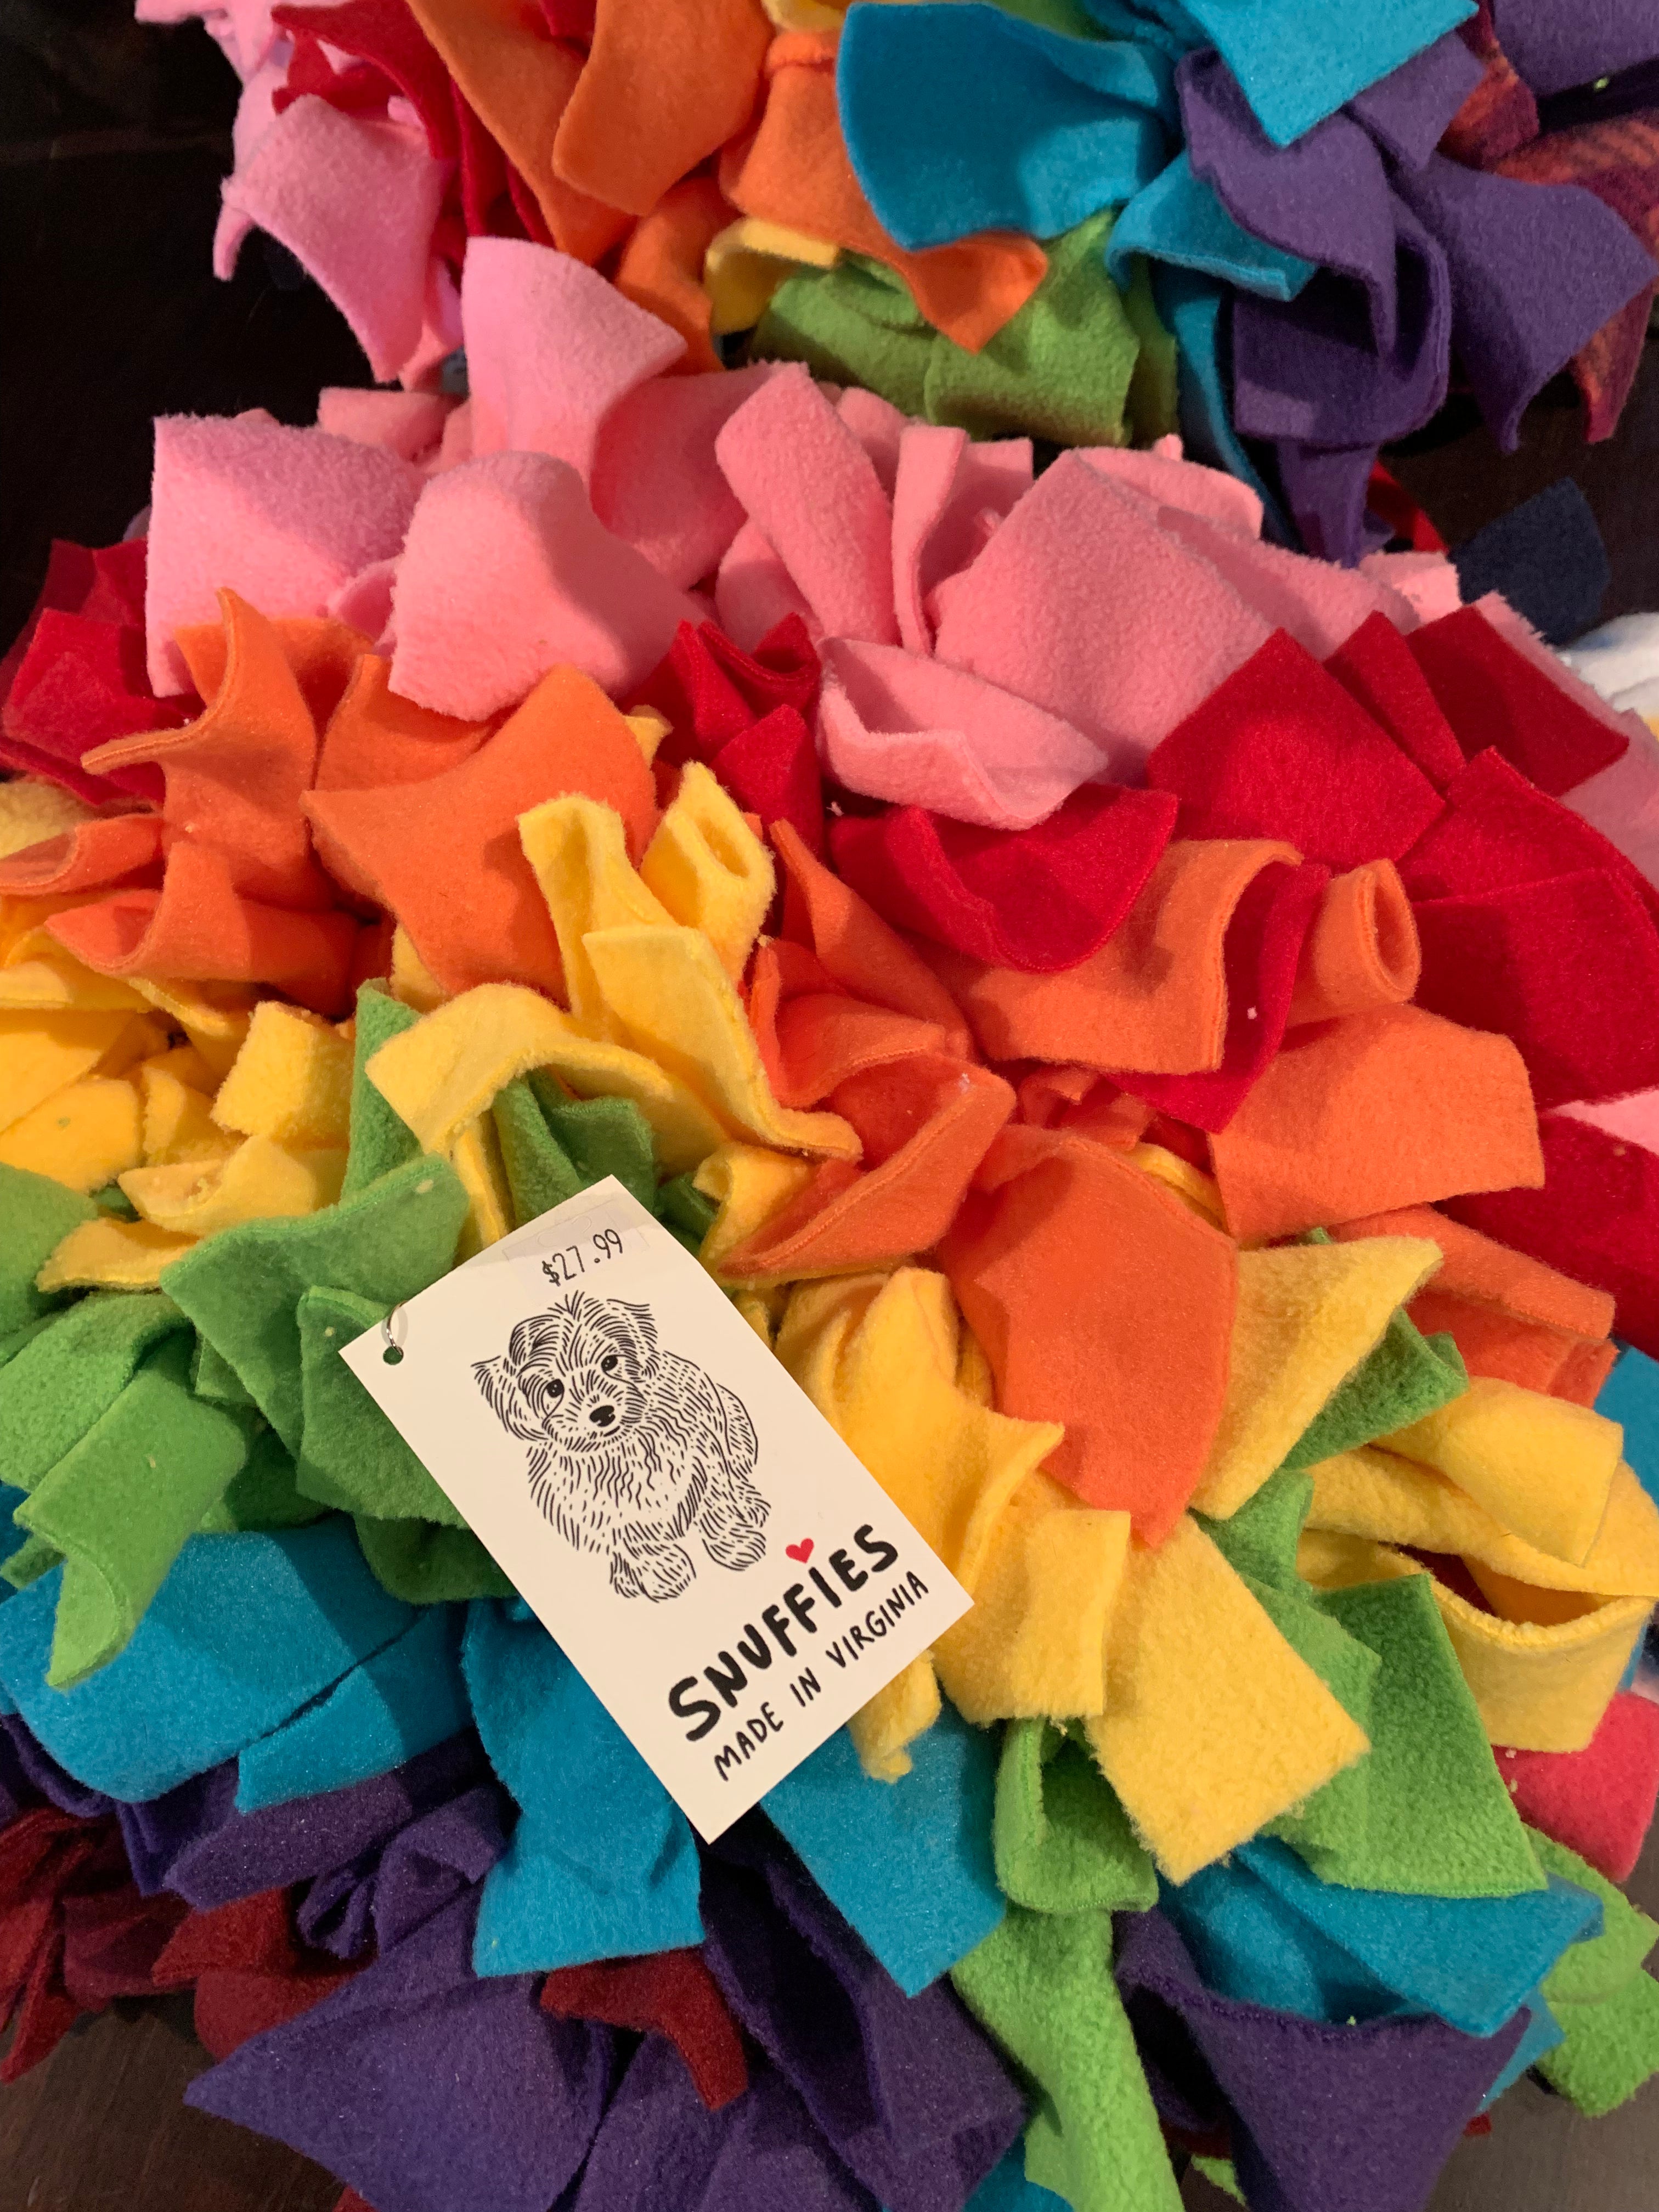 "Snuffies" Locally Crafted Snuffle Mats for Dogs & Cats